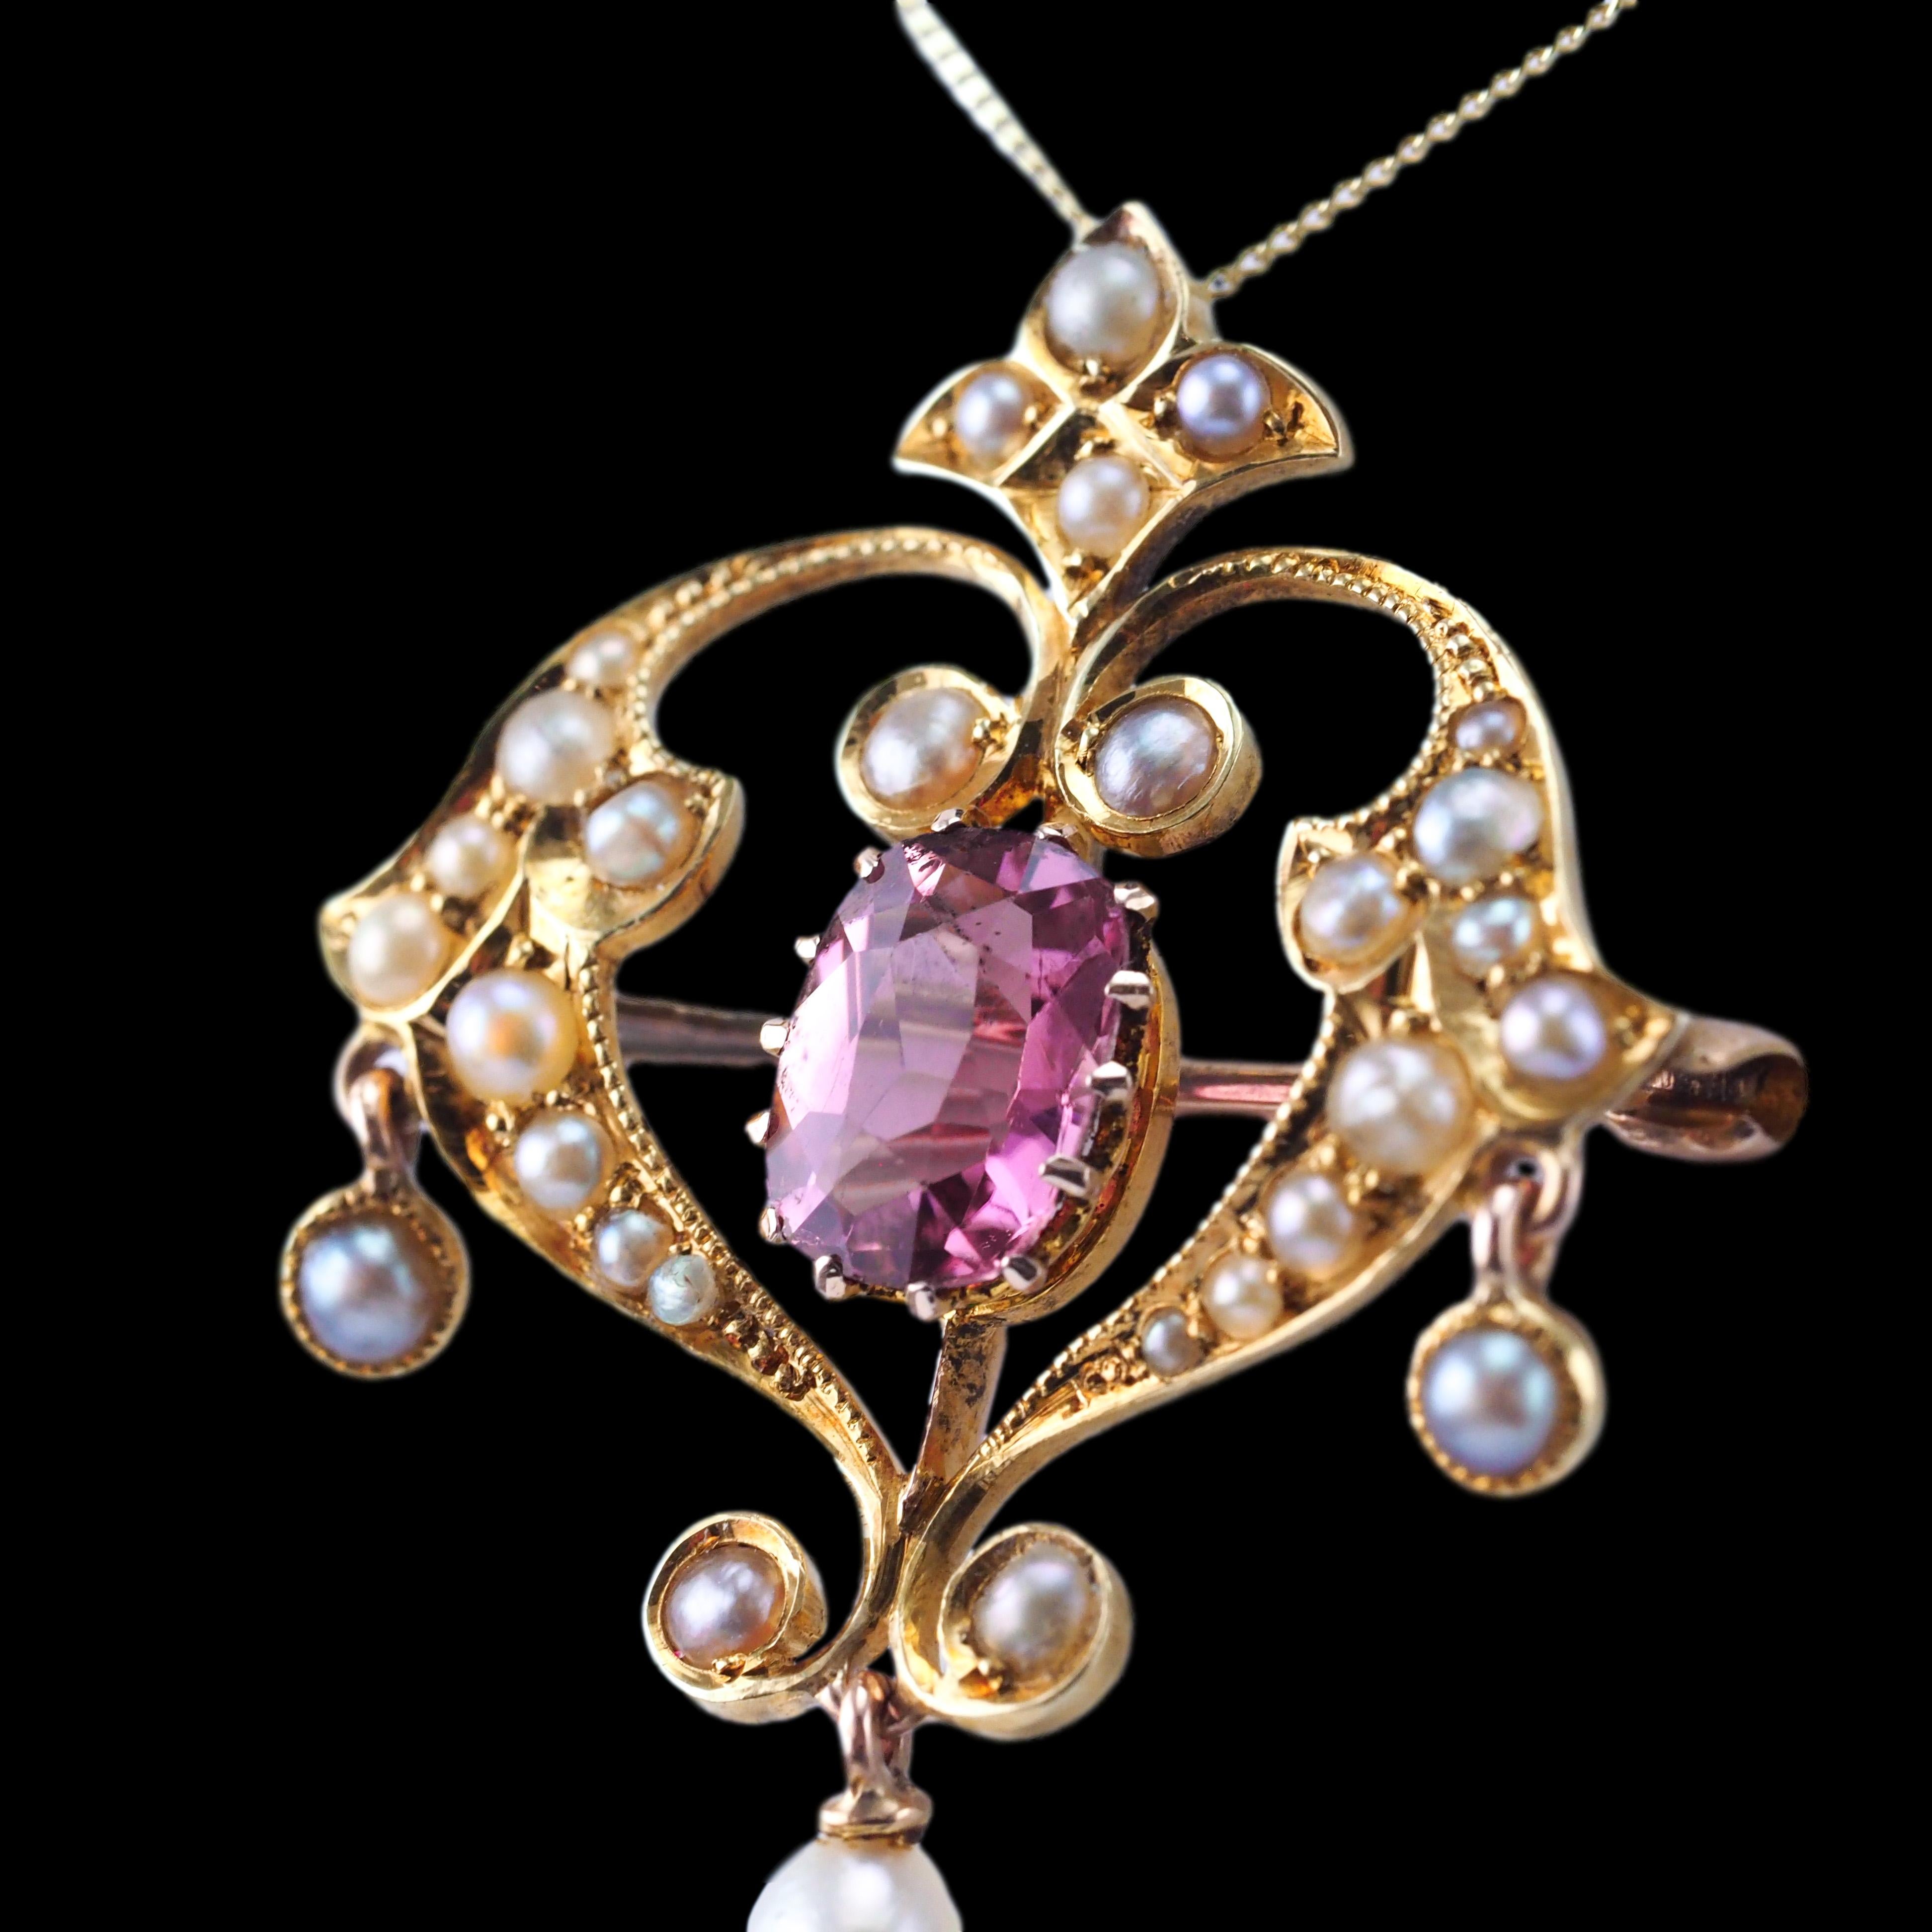 Antique Edwardian Pink Tourmaline & Seed Pearl 15K Gold Pendant Necklace - c.19 For Sale 6